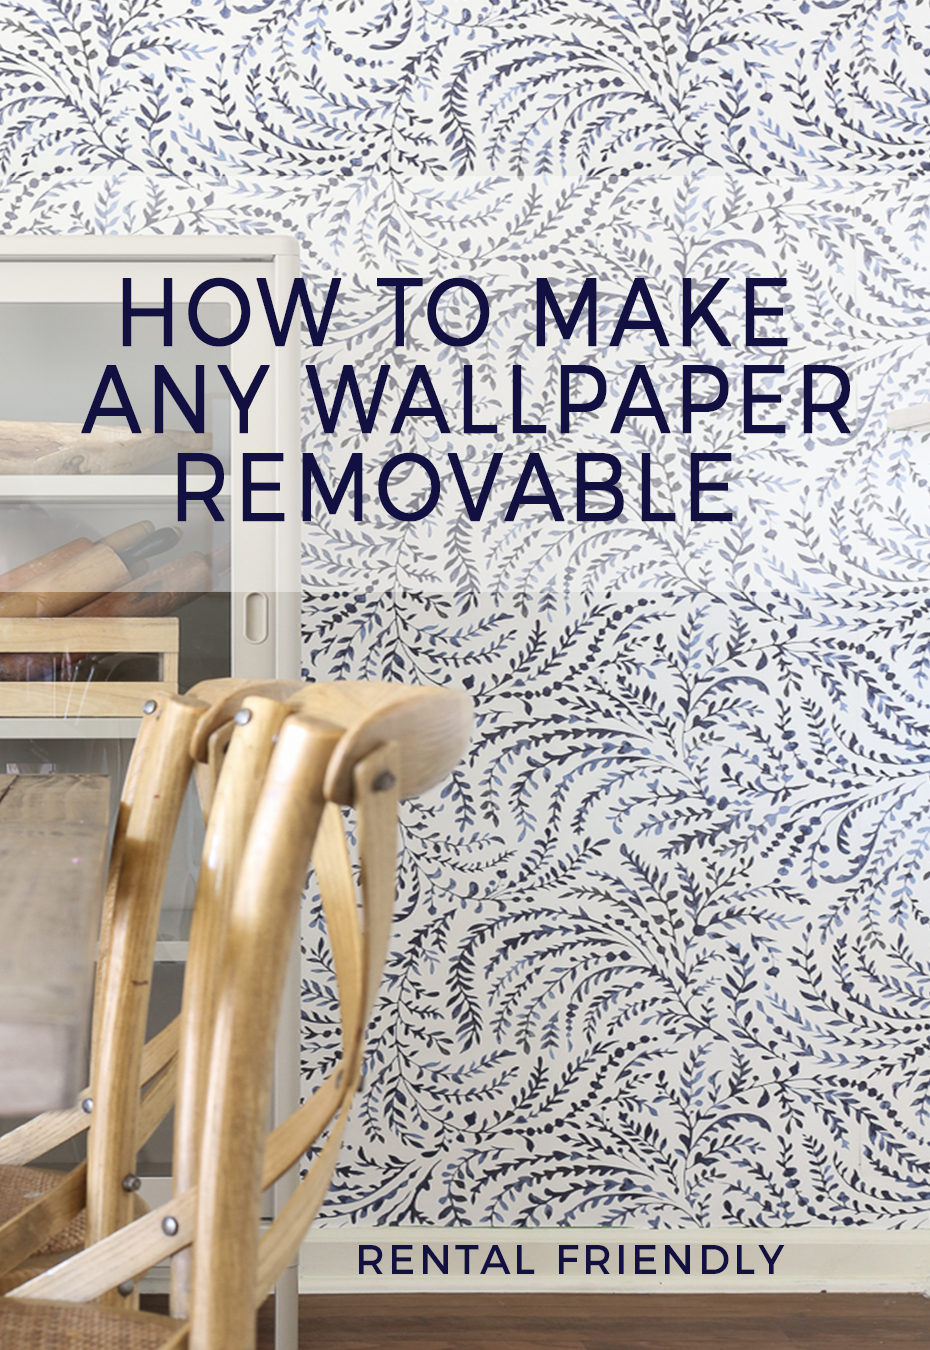 How To Make Any Wallpaper Removable - Plywood - HD Wallpaper 